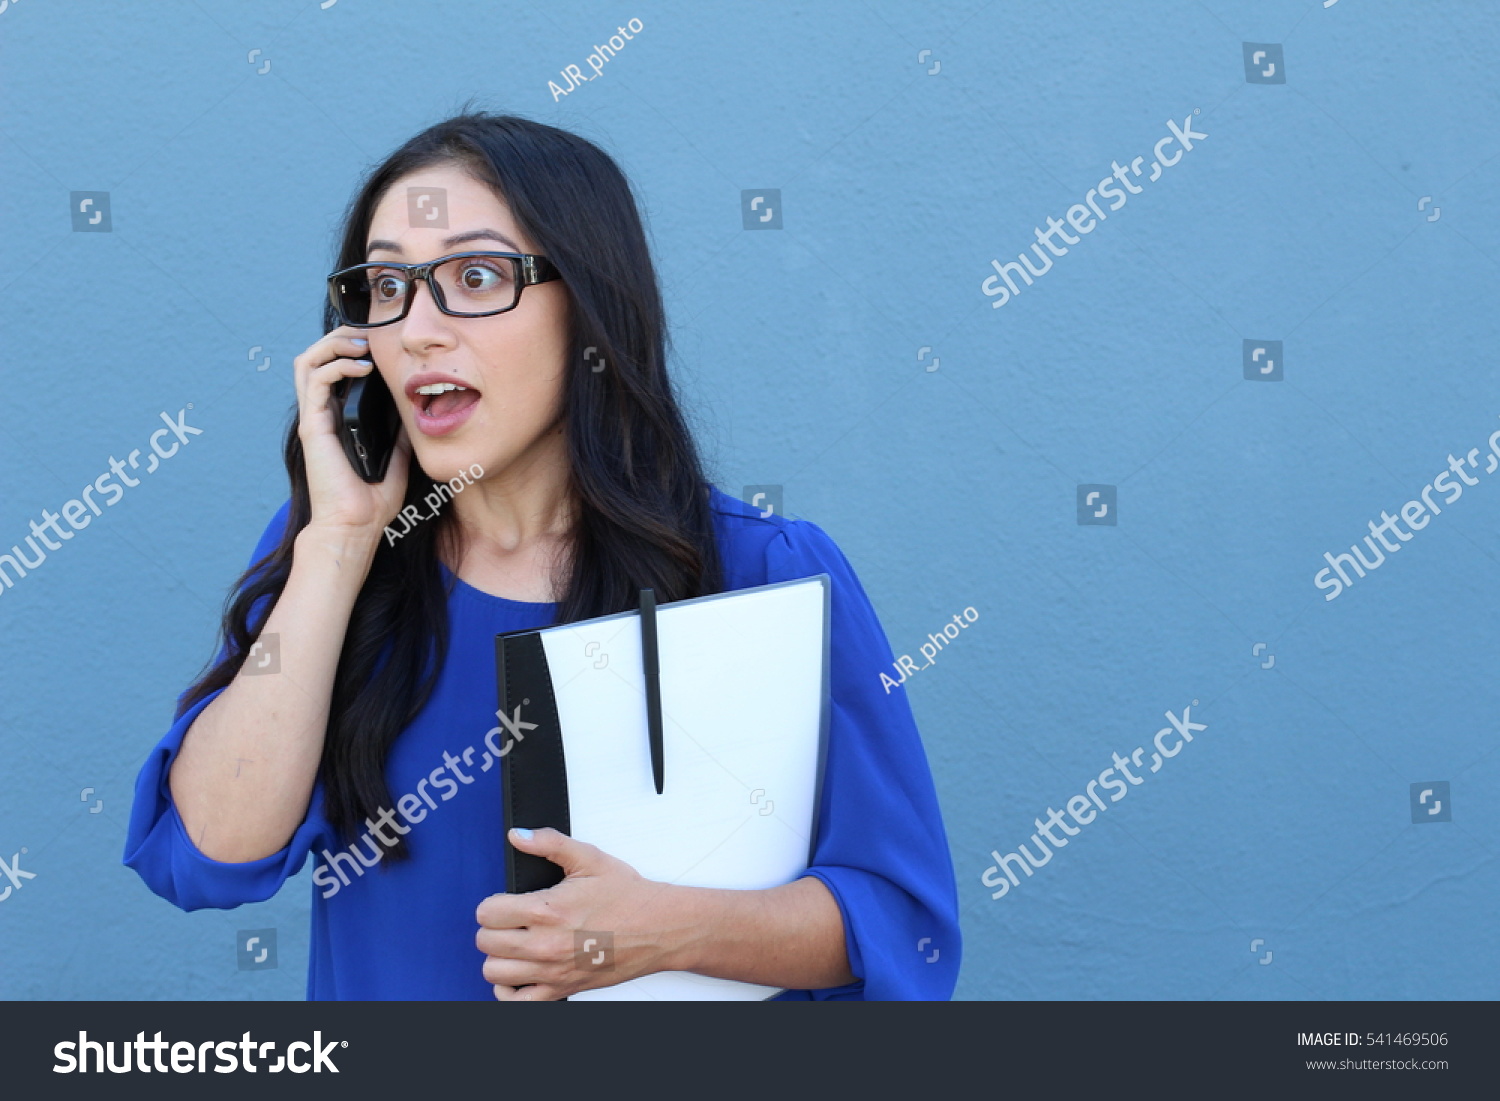 Portrait of a beautiful girl on the phone while getting shocking or surprising news #541469506